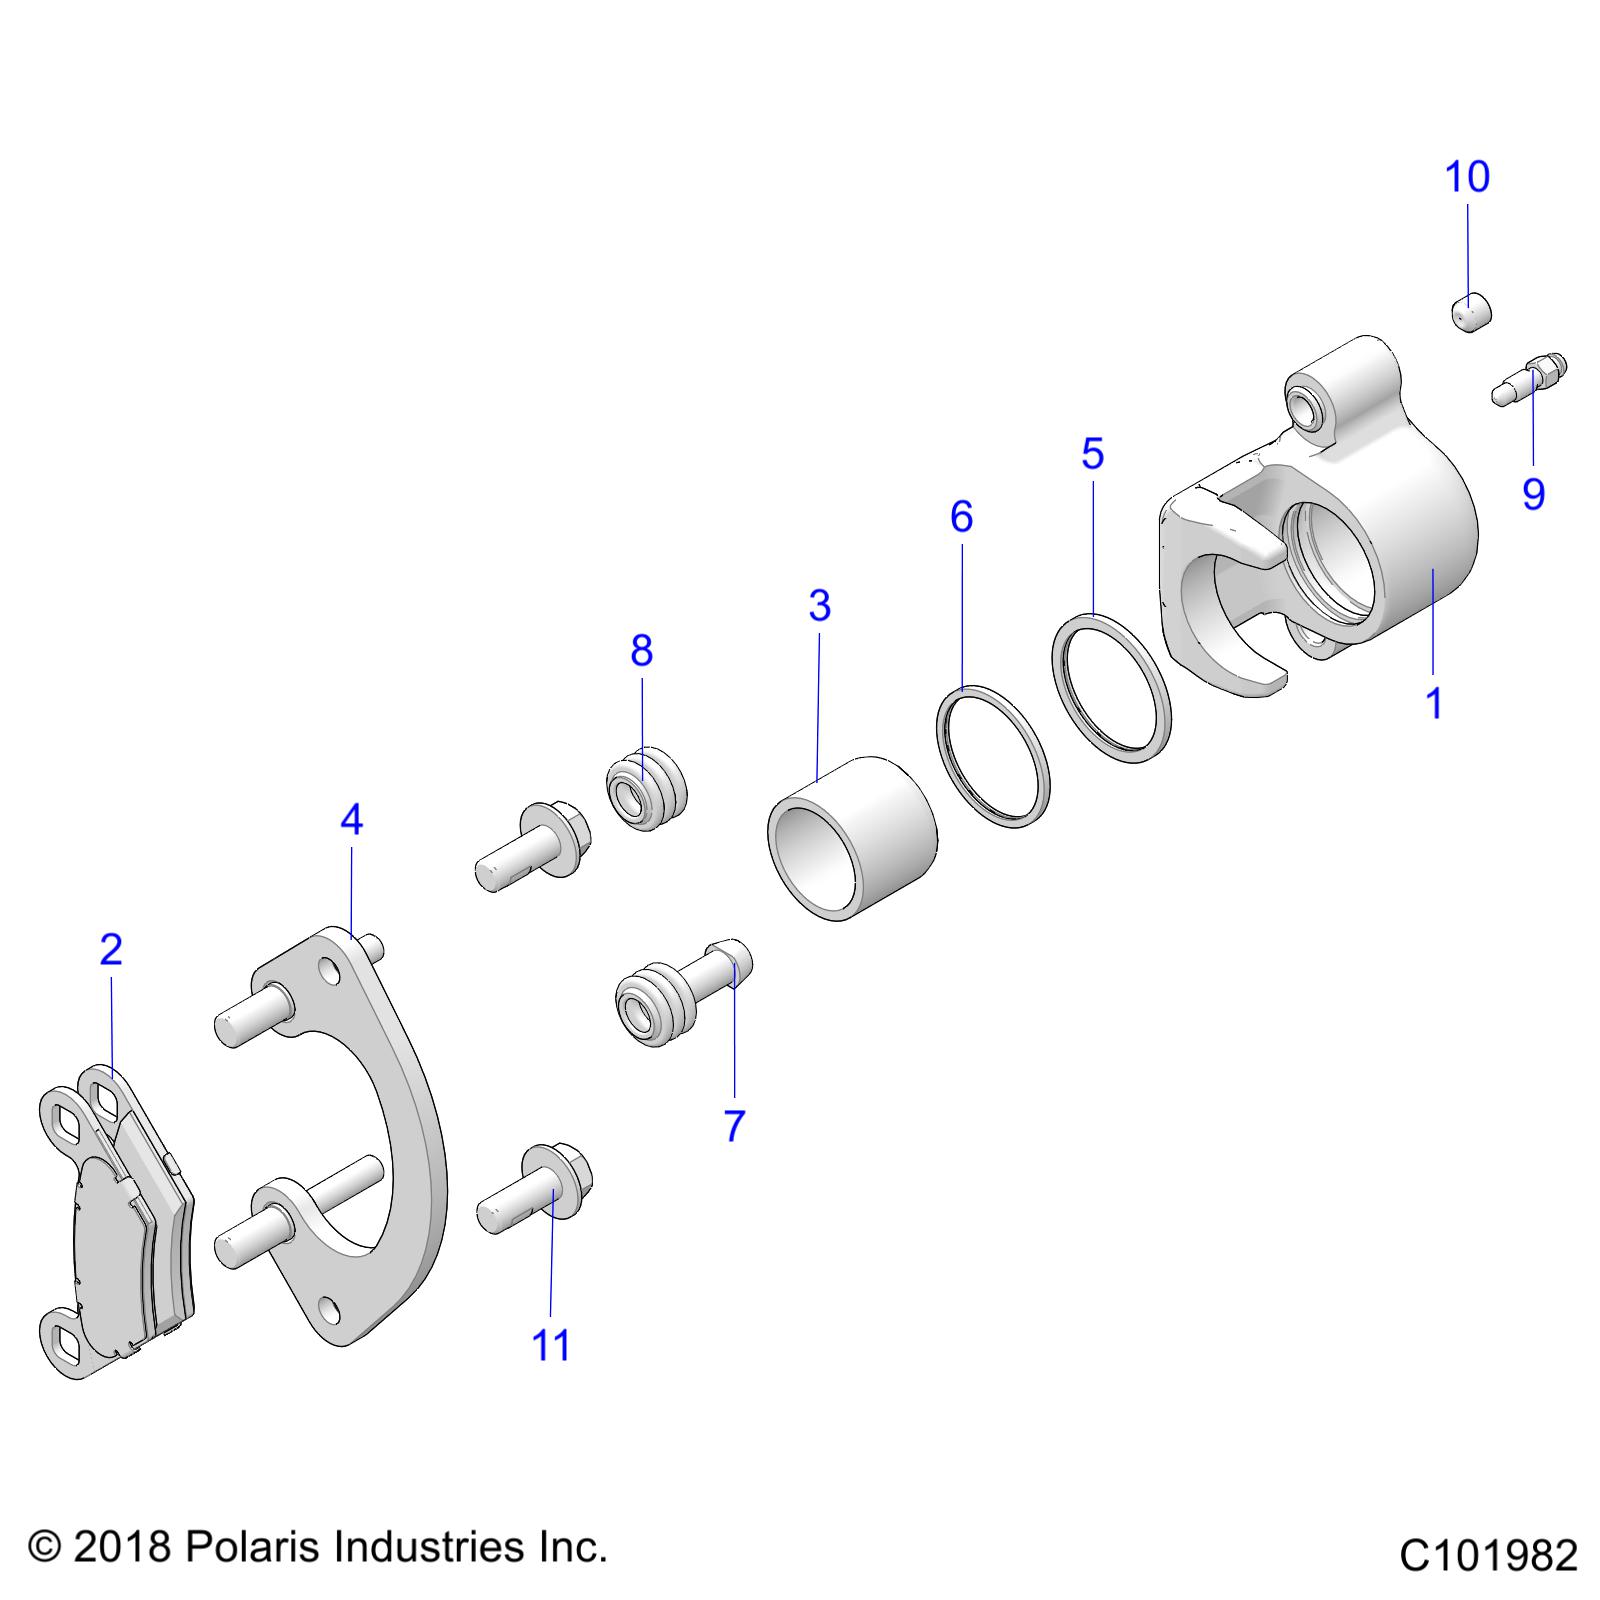 Part Number : 1911225 CALIPER MOUNT ASSEMBLY